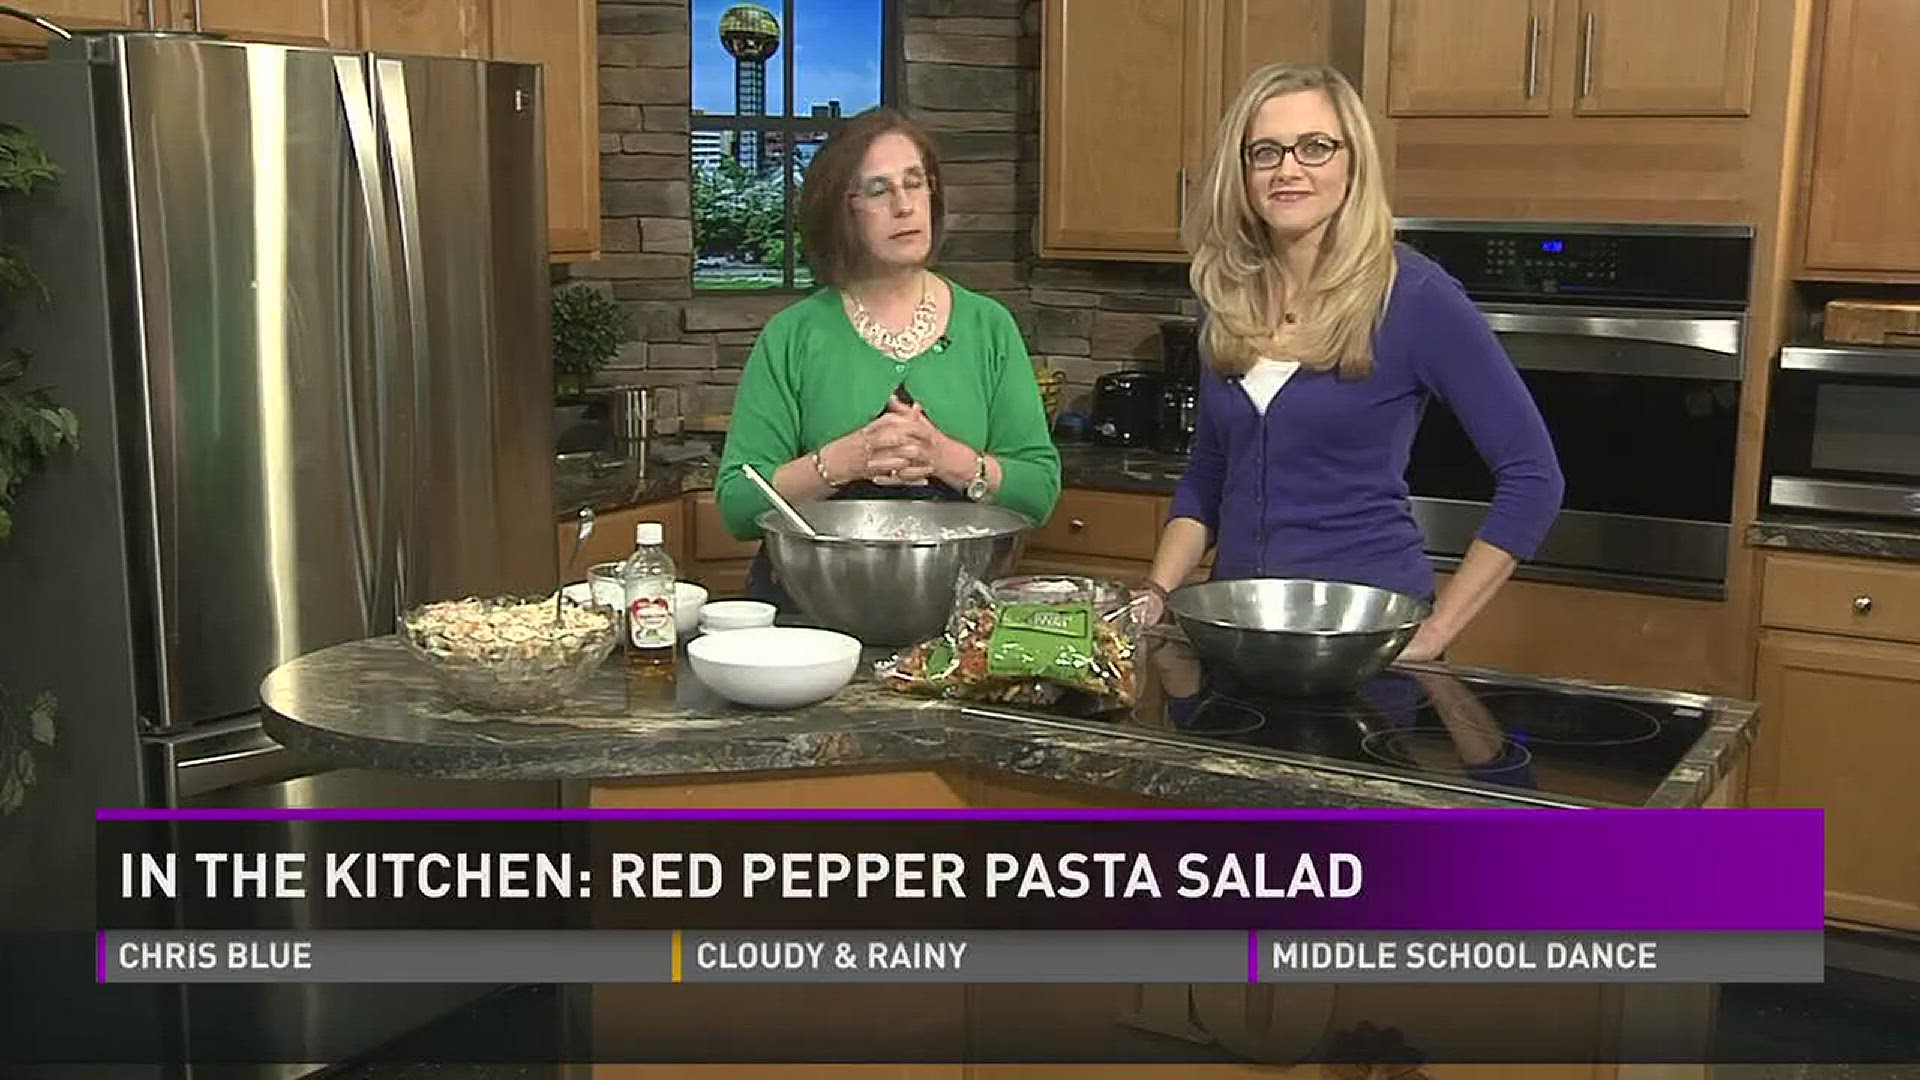 May 23, 2017: Betty Henry with B & G Catering makes a red pepper pasta salad.